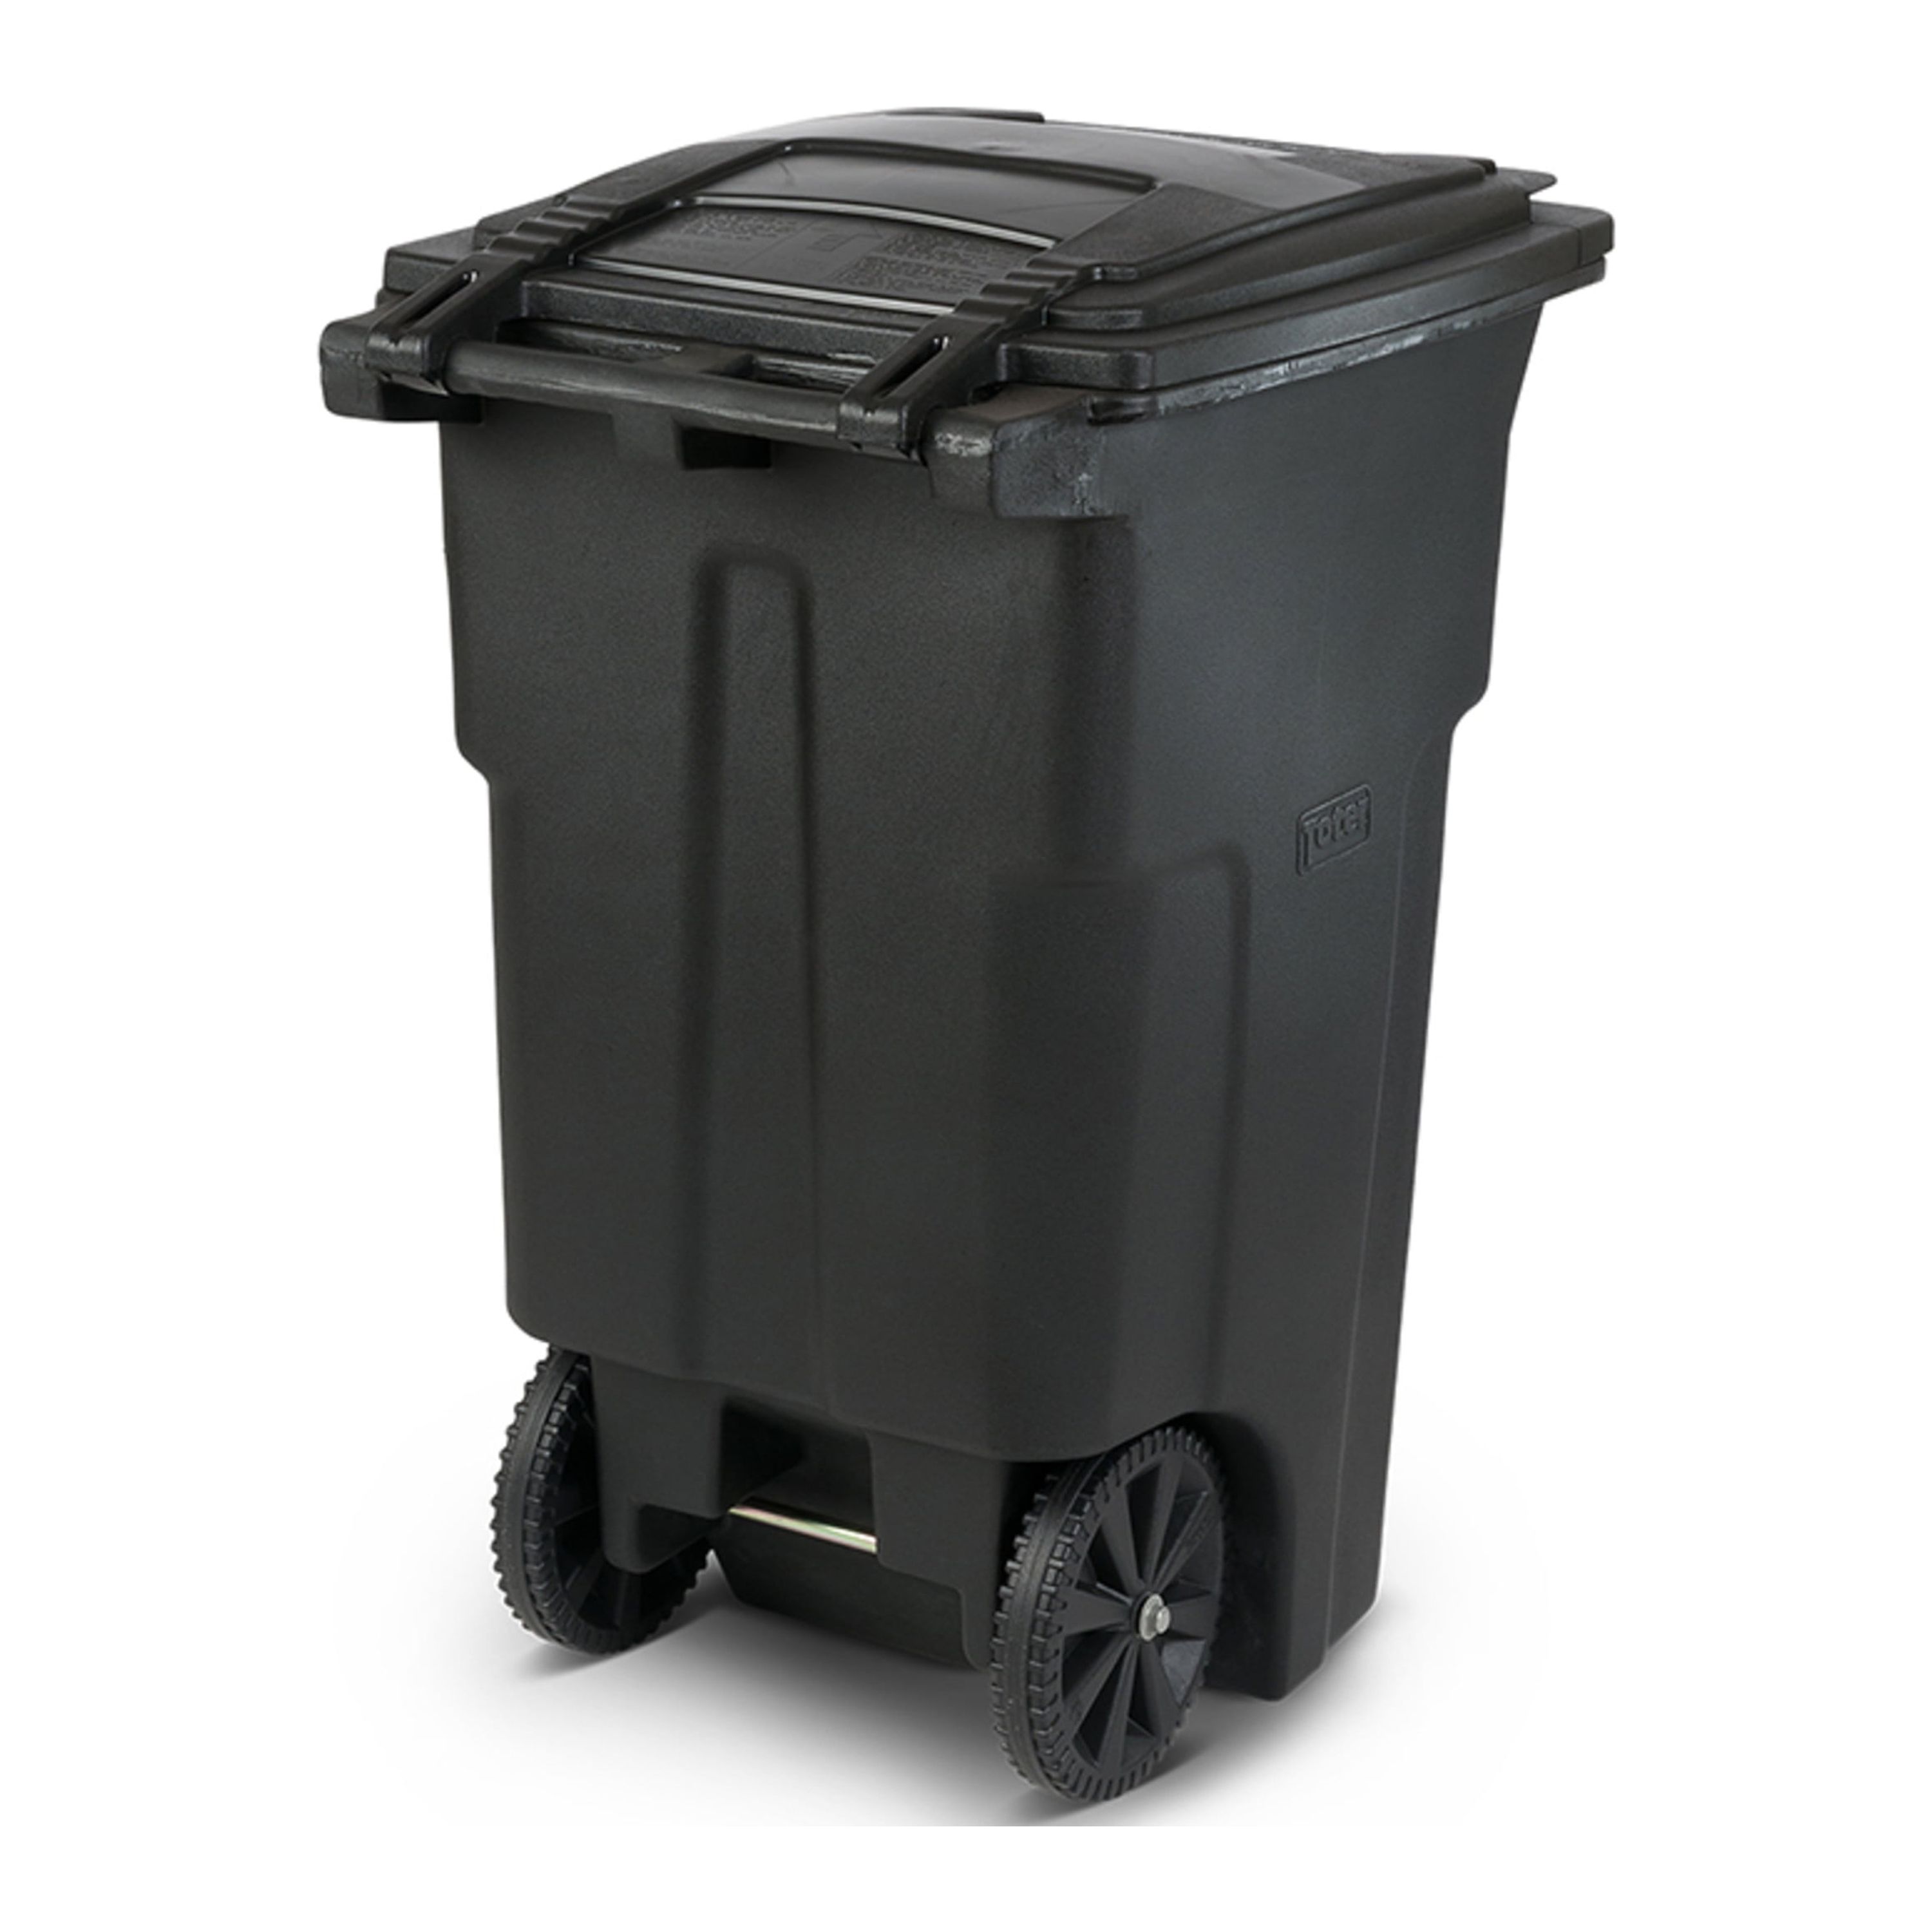 Toter 64 gallon black garbage can with wheels and lid - image 3 of 7